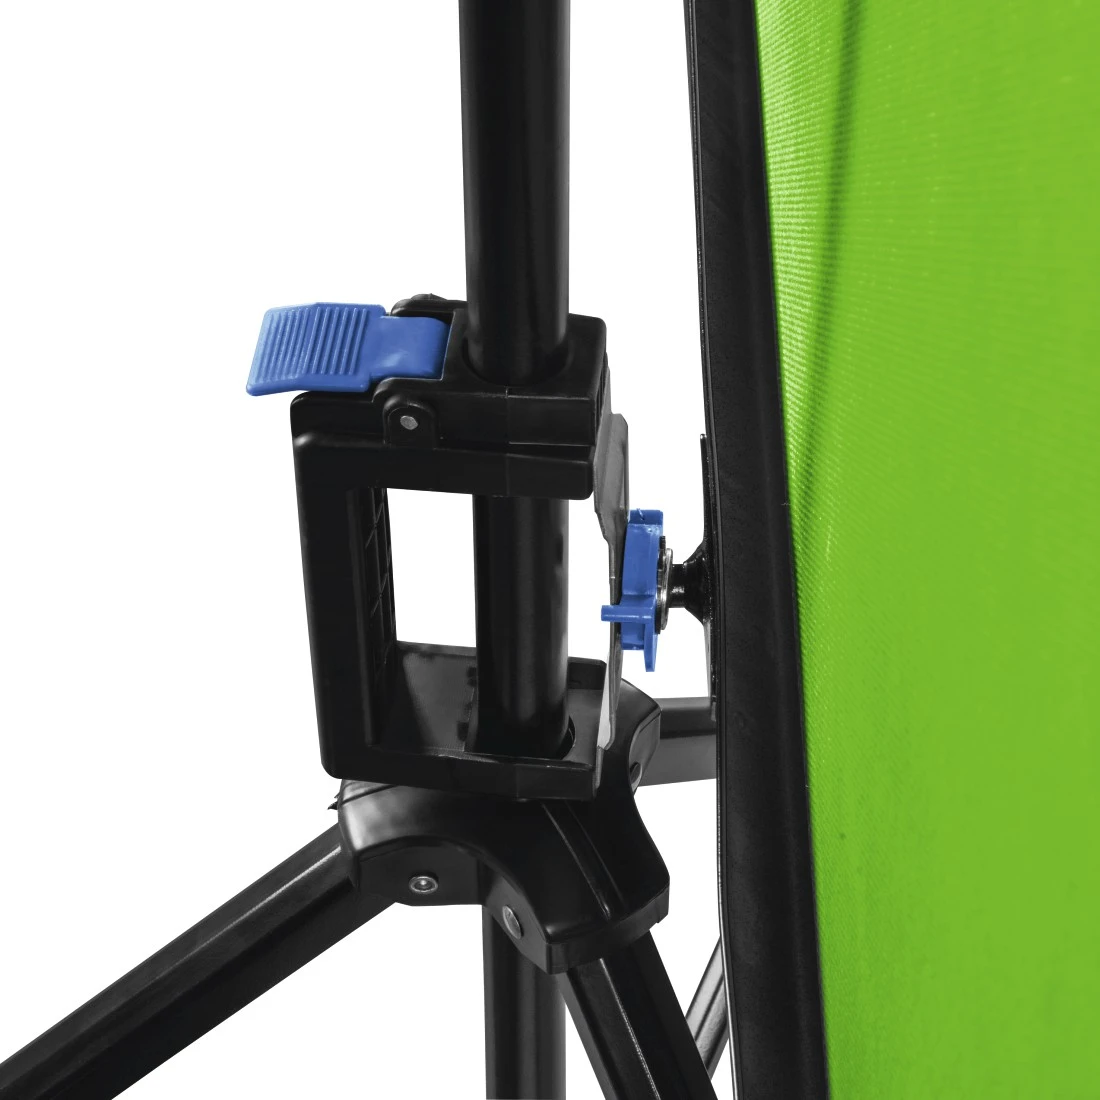 Green Screen Background with Tripod, 180 x 180 cm, 2 in 1 | Hama